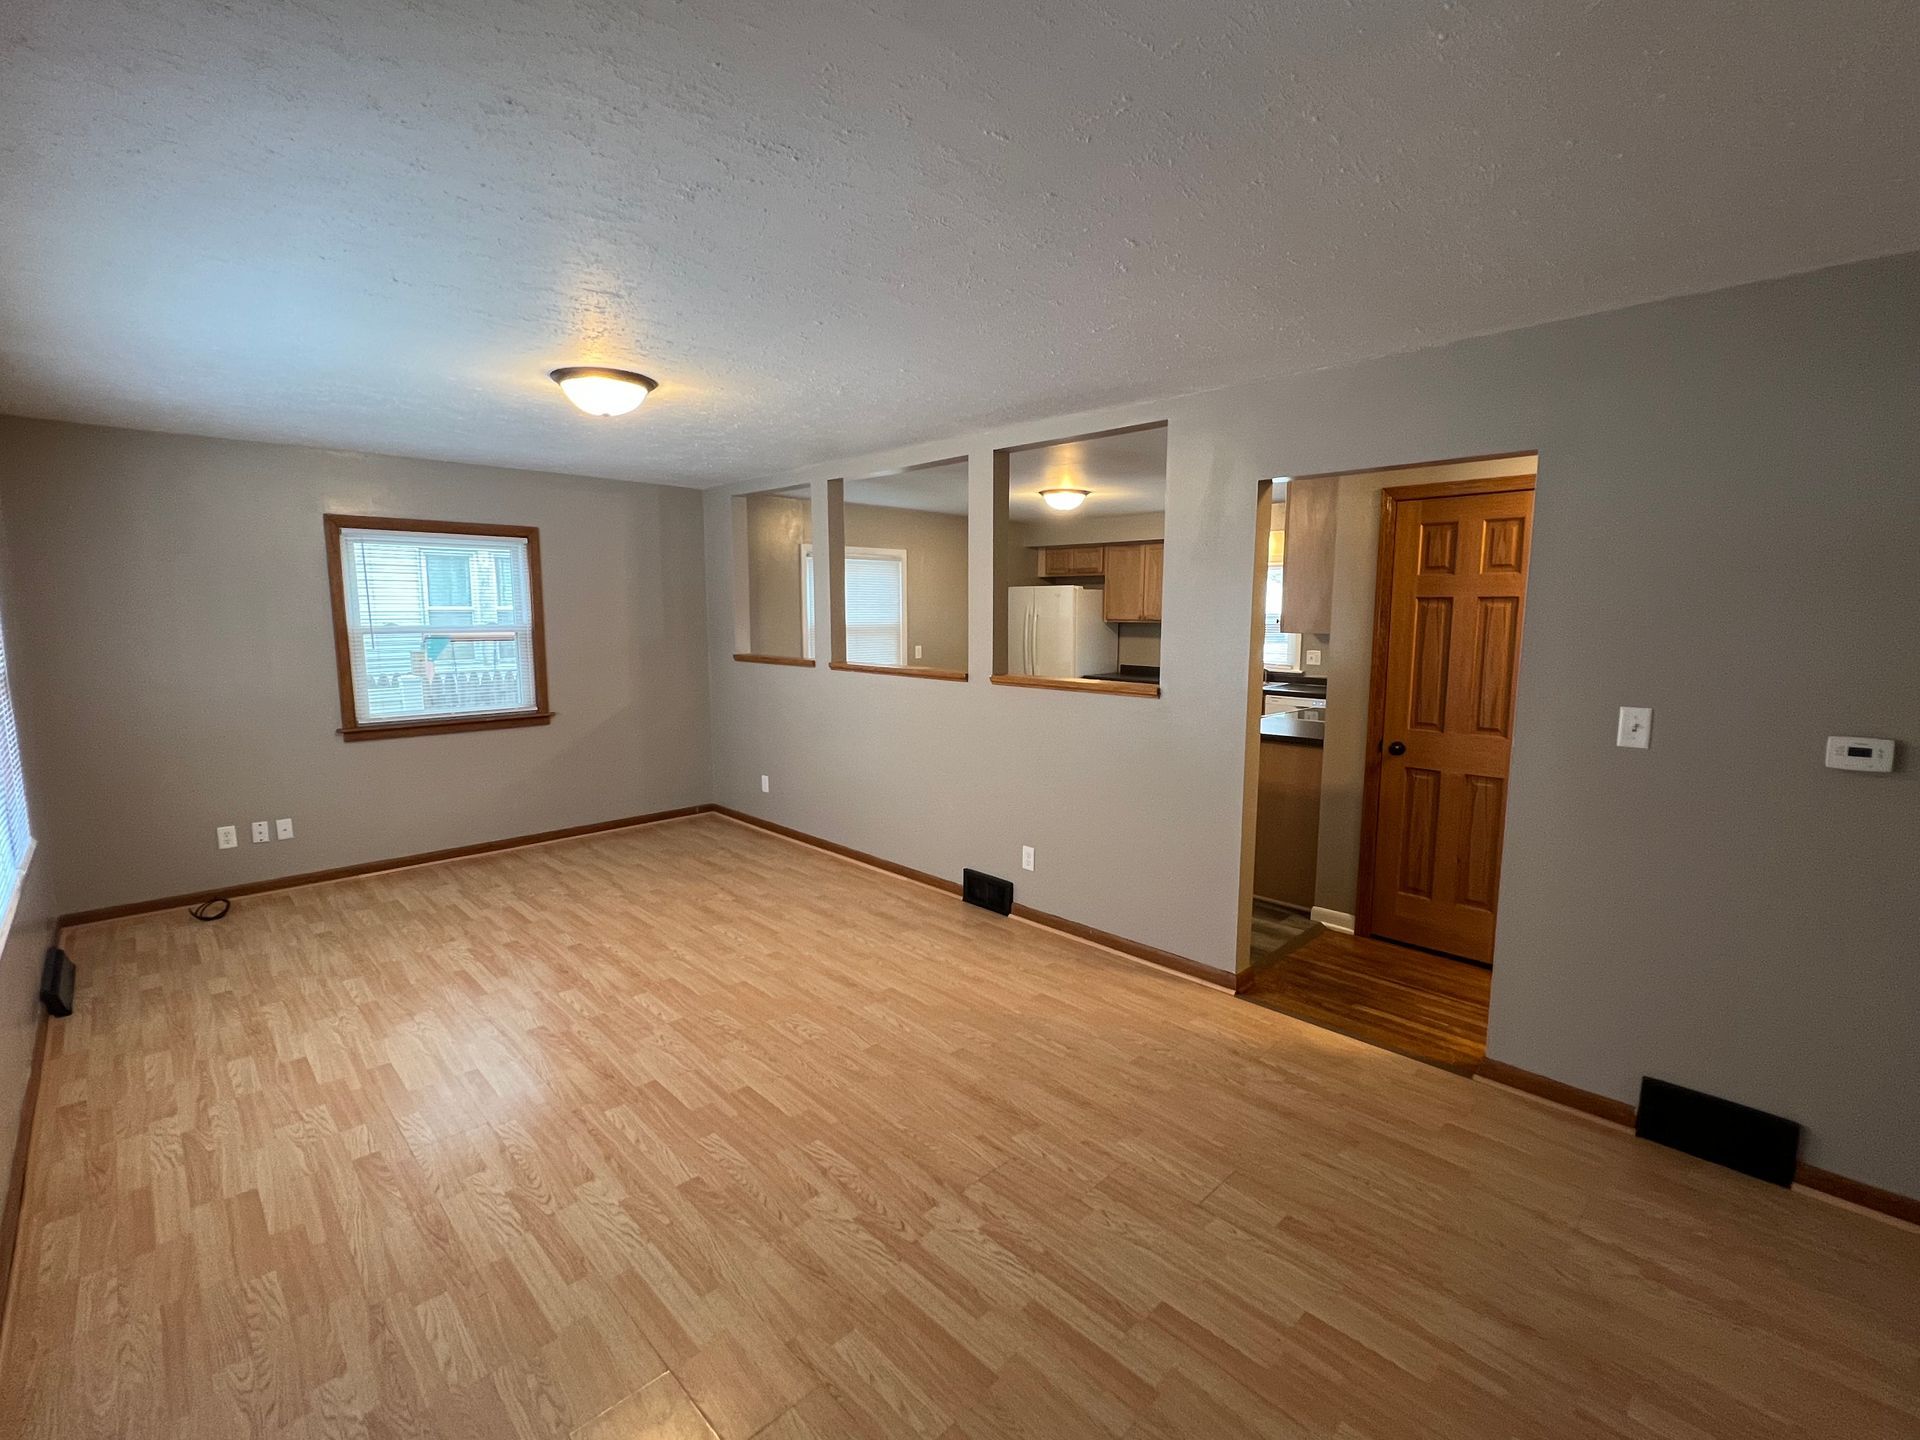 An empty living room with hardwood floors and a kitchen in the background.